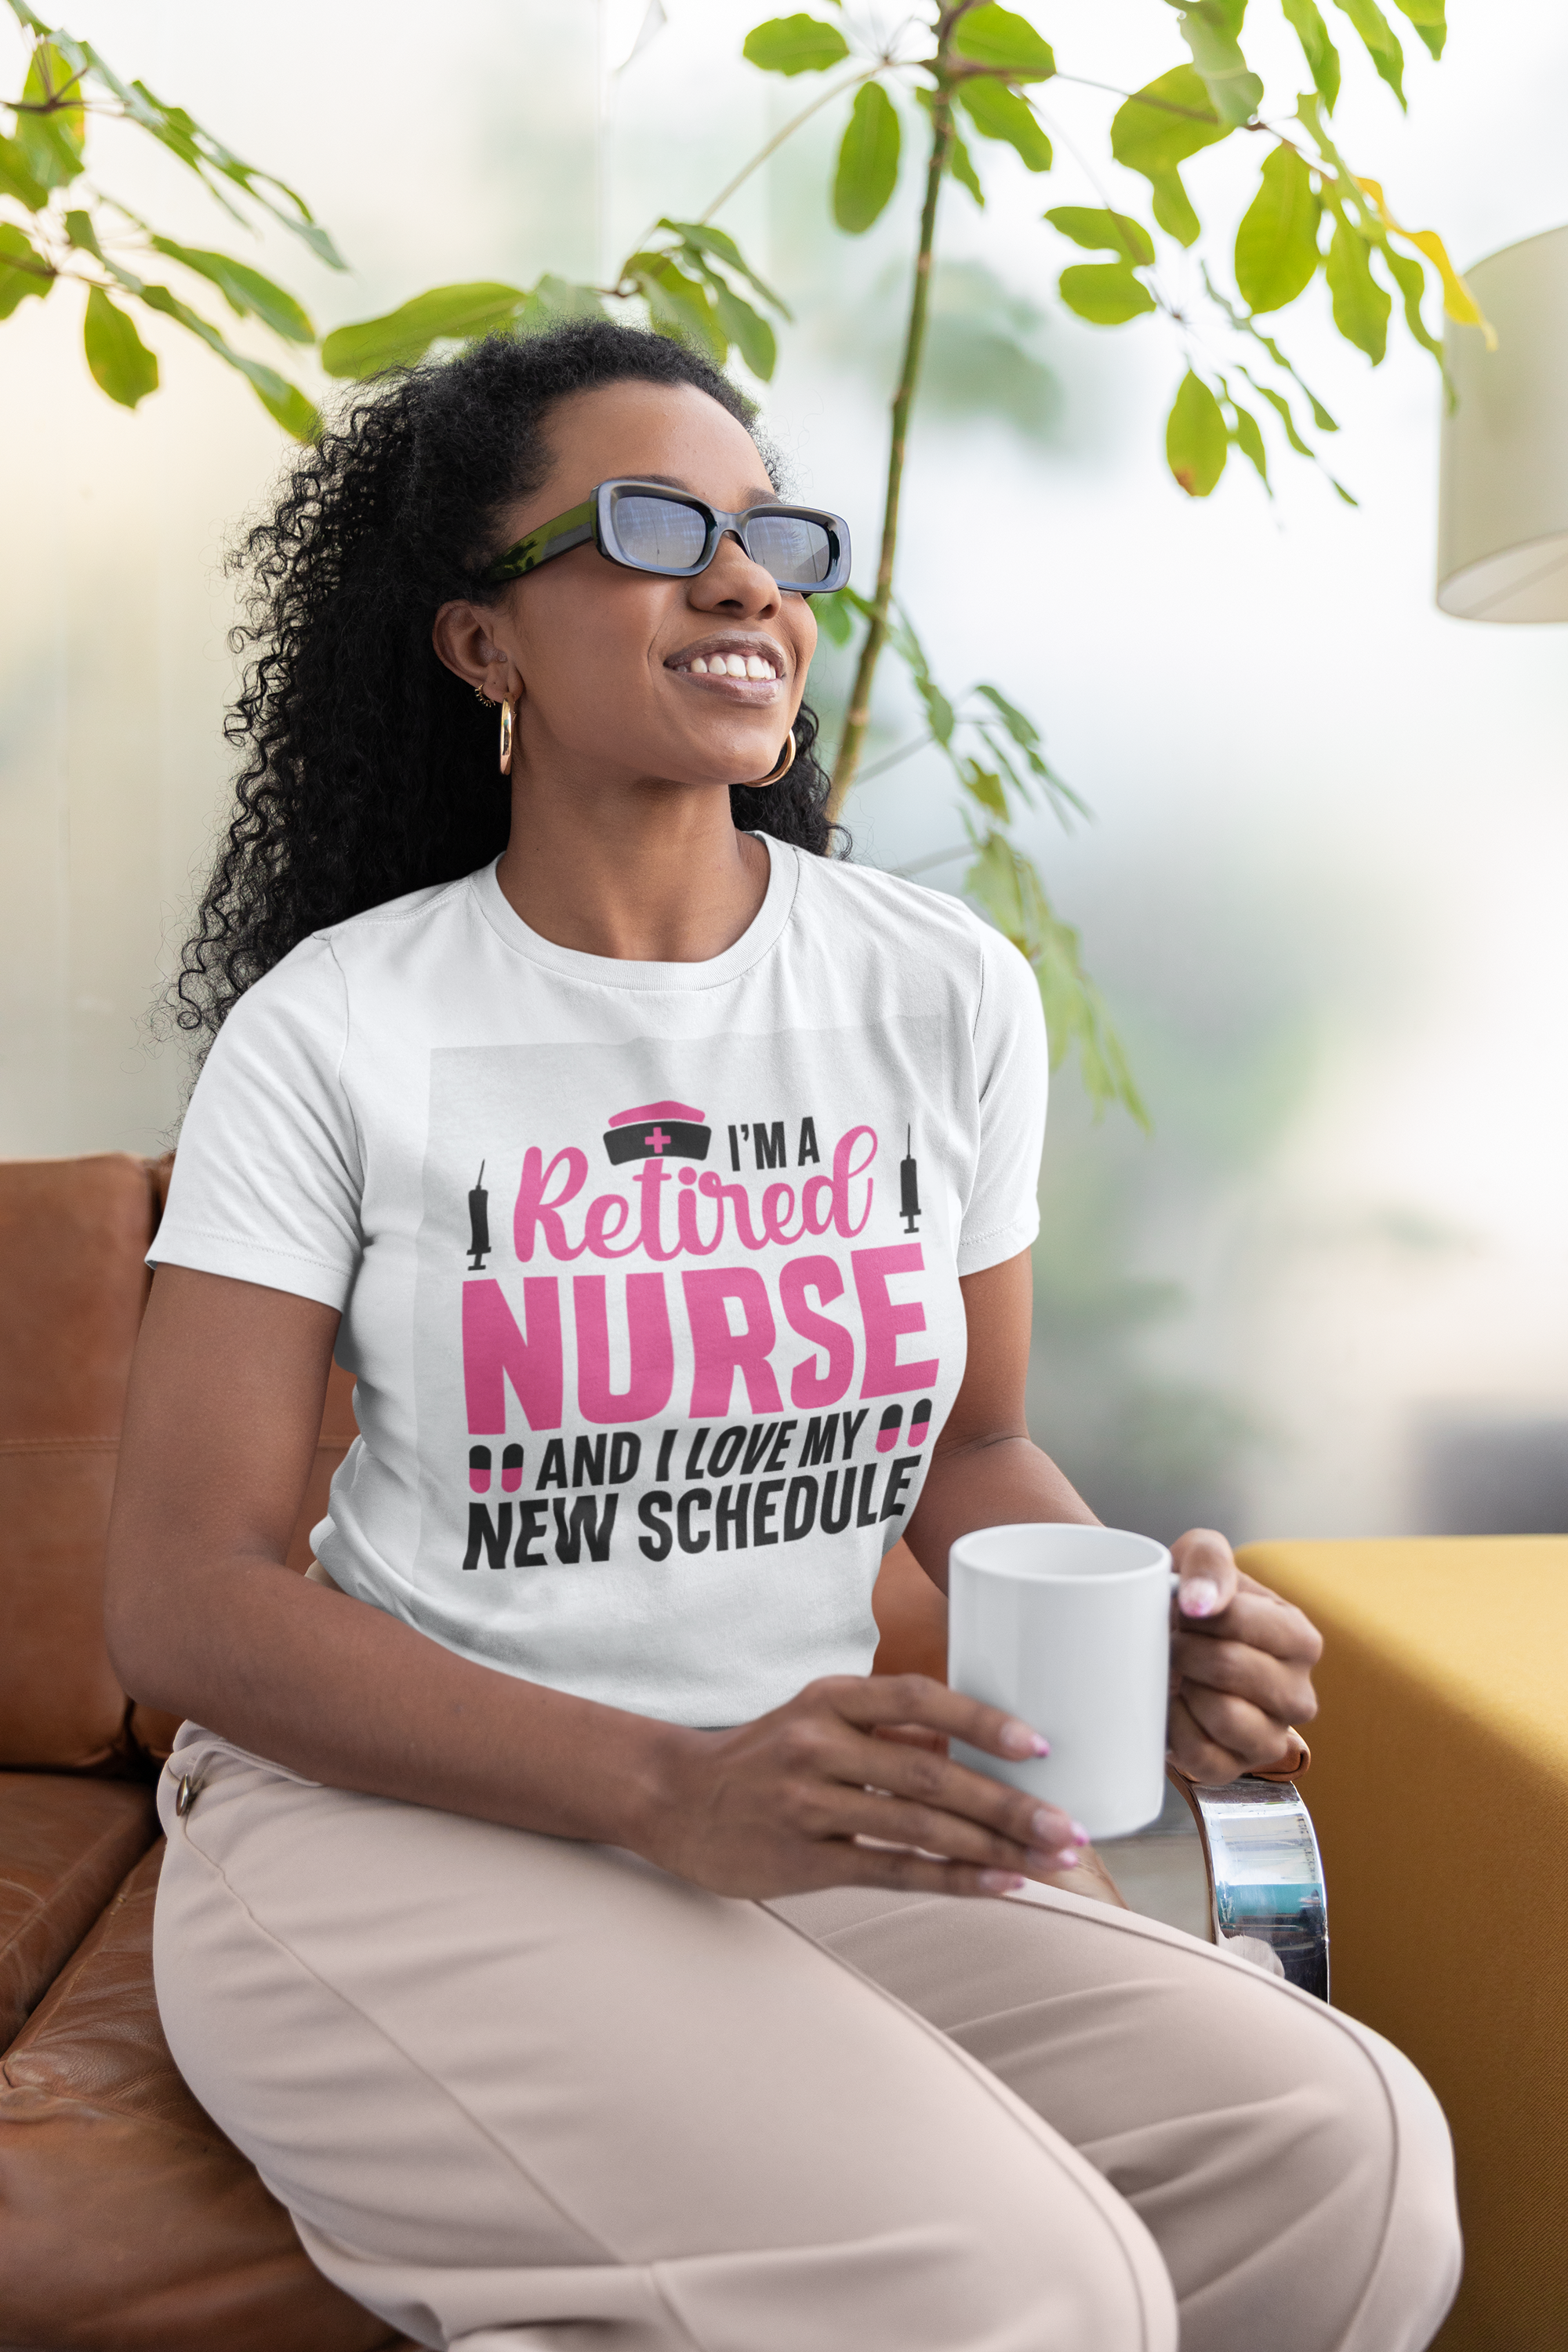 The image presents a high-quality unisex jersey V-neck tee with the proud statement "I’m A Retired Nurse" across the front. The tee is designed to offer comfort and style, featuring a flattering fit that suits all body types, showcased in a neutral color that emphasizes the text and makes it stand out.